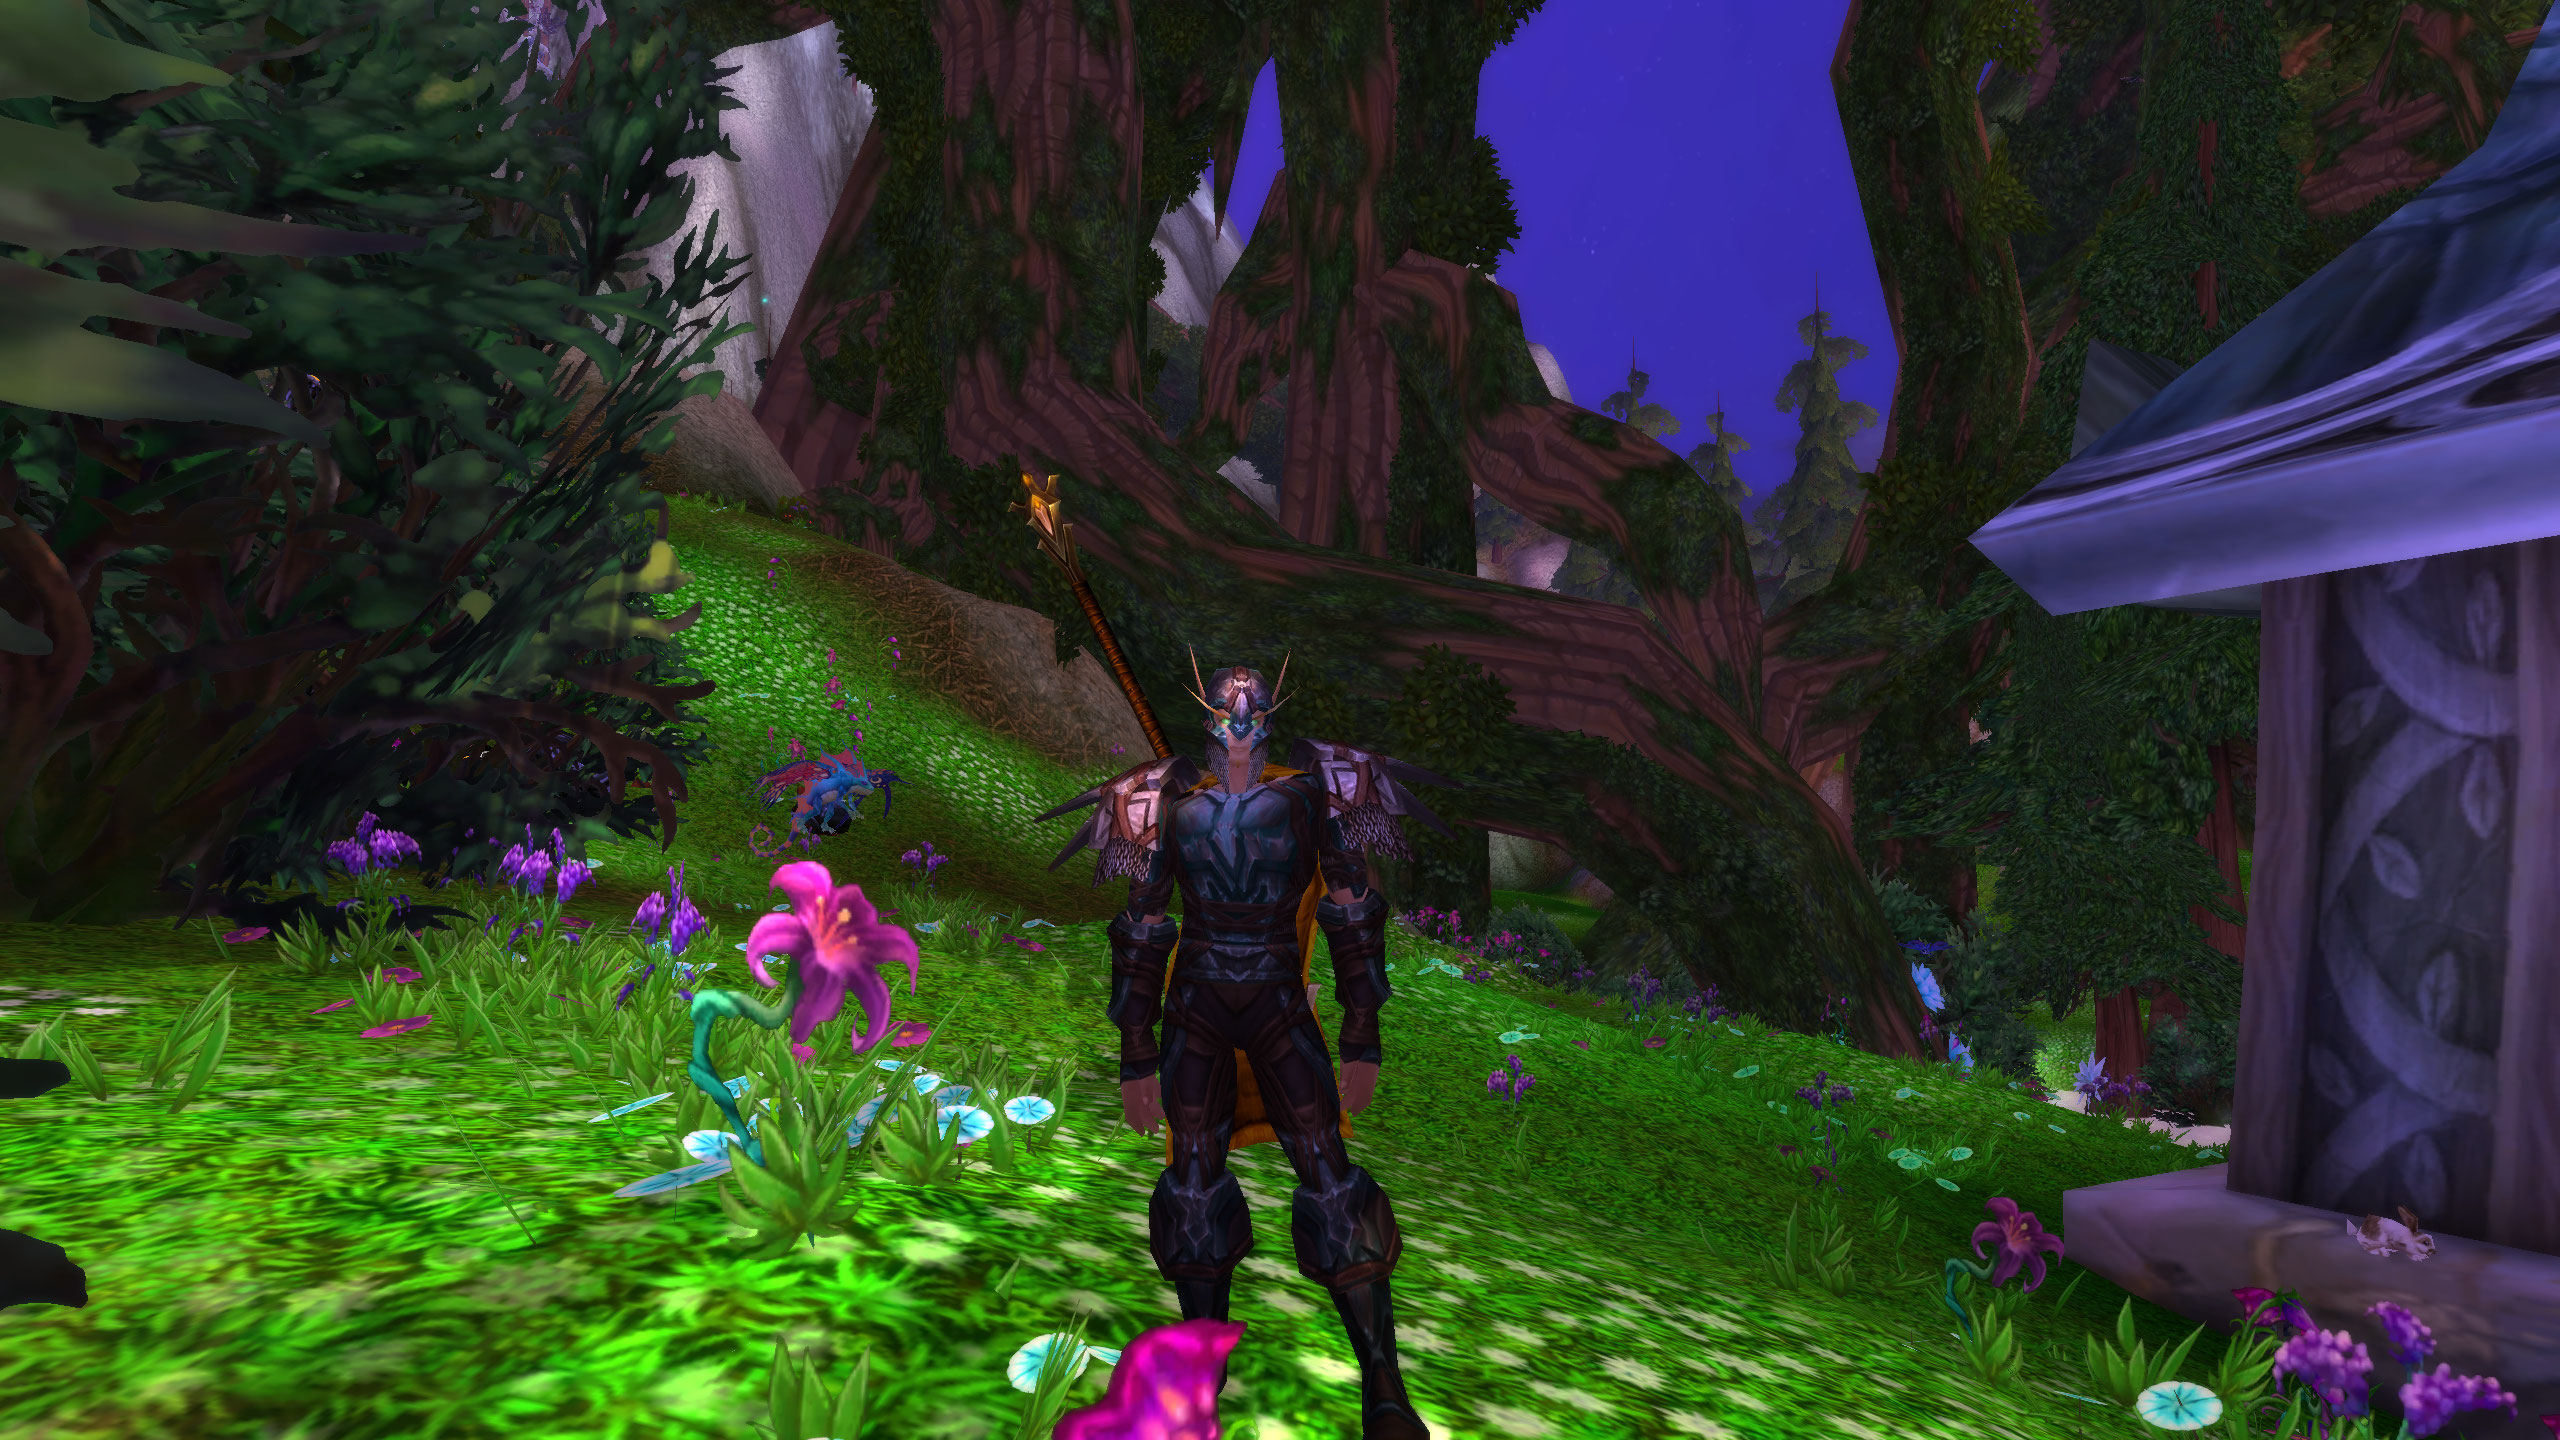 WoW cataclysm hyjal or vashj'ir - a blood elf is standing in a lush meadow near a building